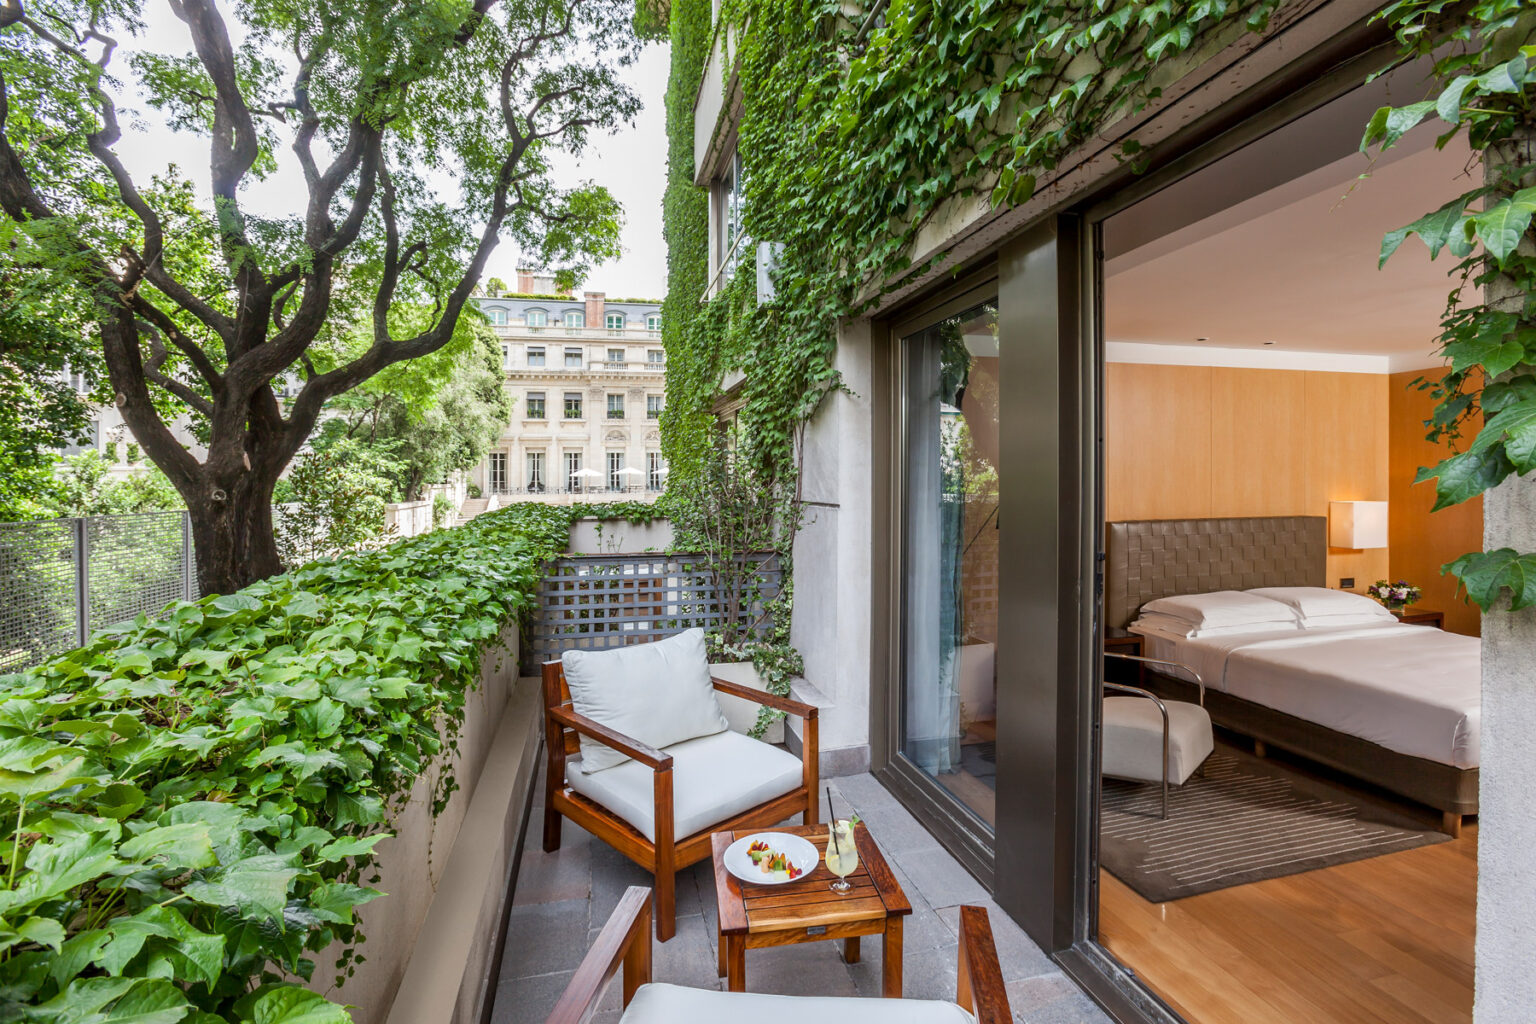 Hotel room balcony surrounded by trees